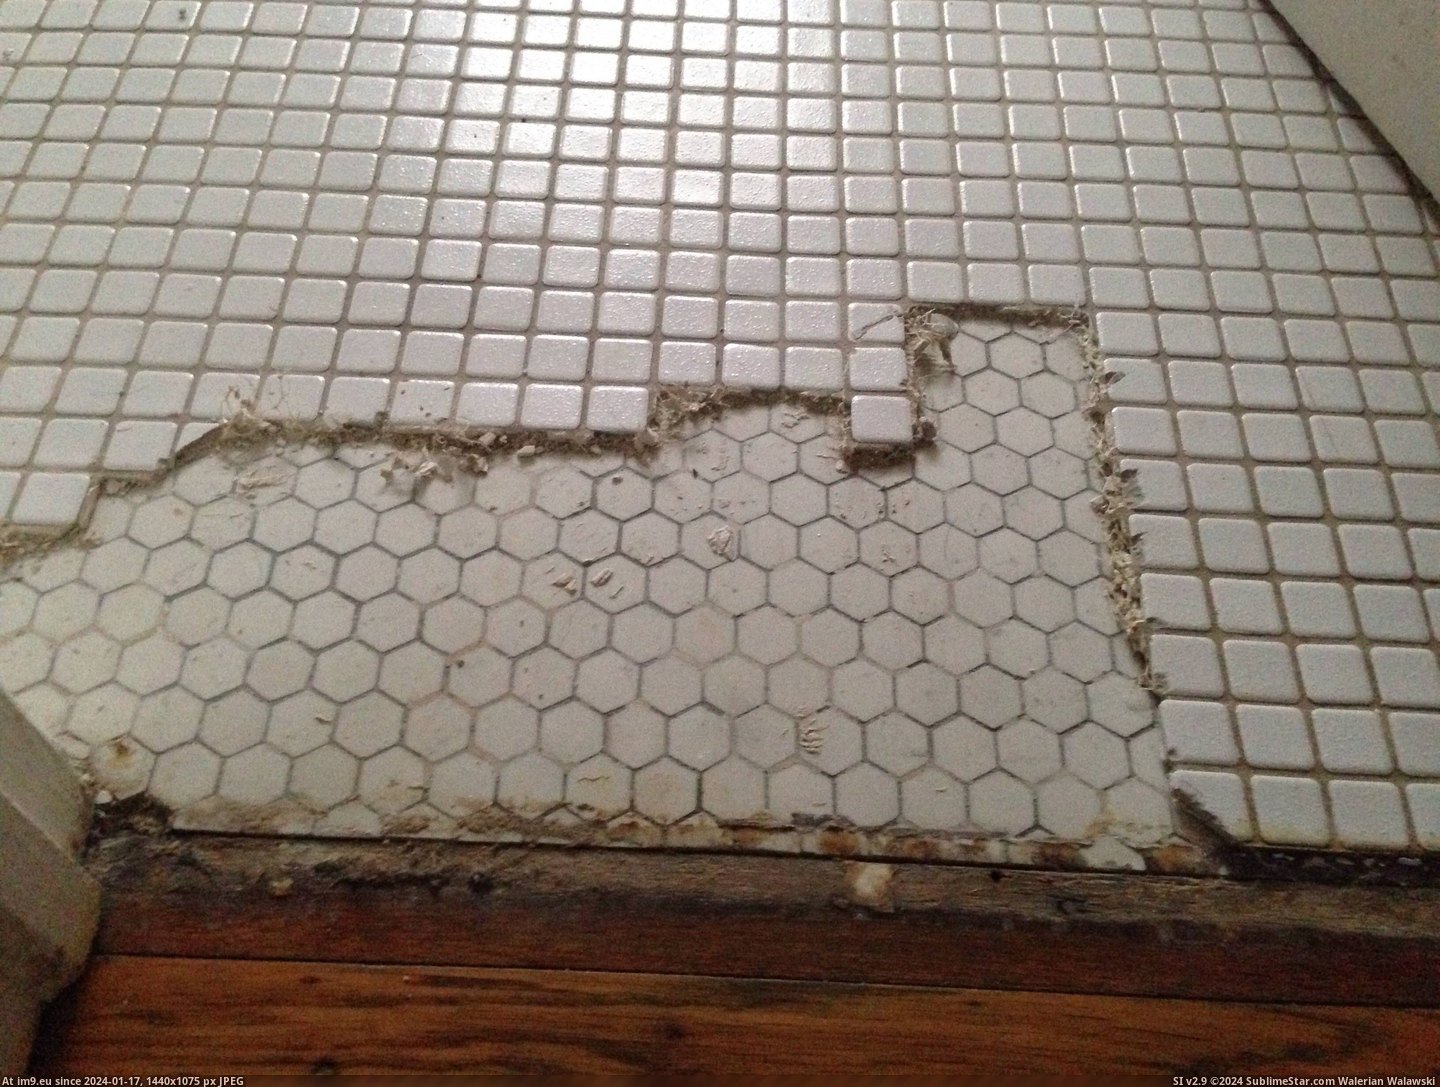 #Time #Wife #Wanted #Tile #Hexagon #Bathroom #Hour #1920s [Pics] My wife and I wanted to redo our 1920s bathroom with more time-appropriate hexagon tile. An hour in, I see this. Pic. (Image of album My r/PICS favs))